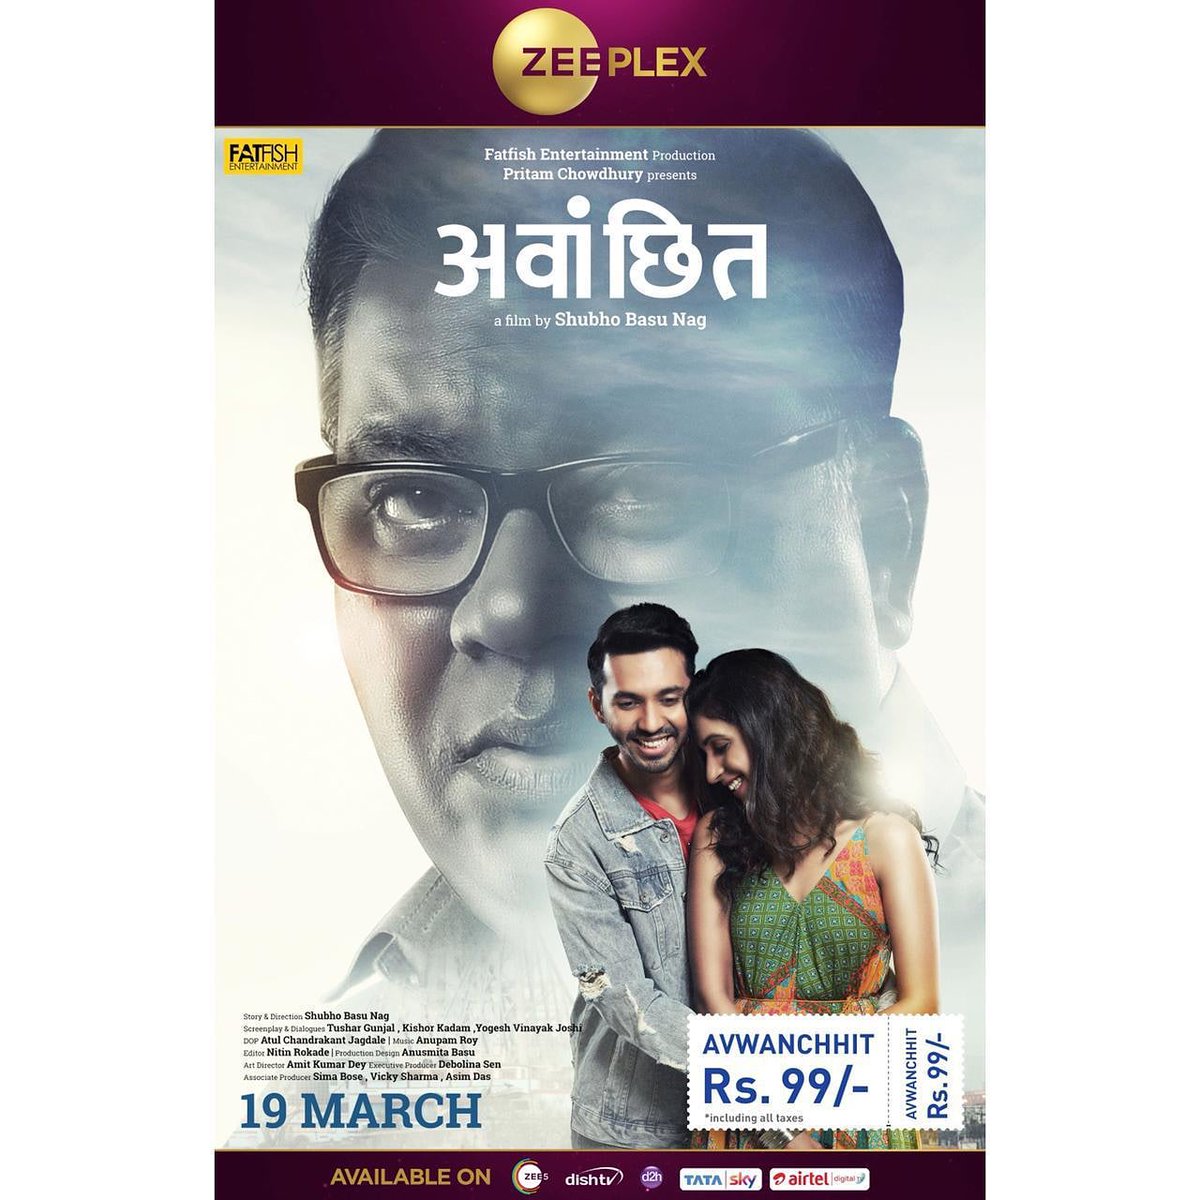 #FatfishEntertainment produces #Avwanchhit, a #Marathi language film shot extensively in the city of joy, #Kolkata, a first in the Marathi Film Industry.
Watch the story of a bitter-sweet tale of parental love, child’s understanding, love, friendship, loyalty and old age.